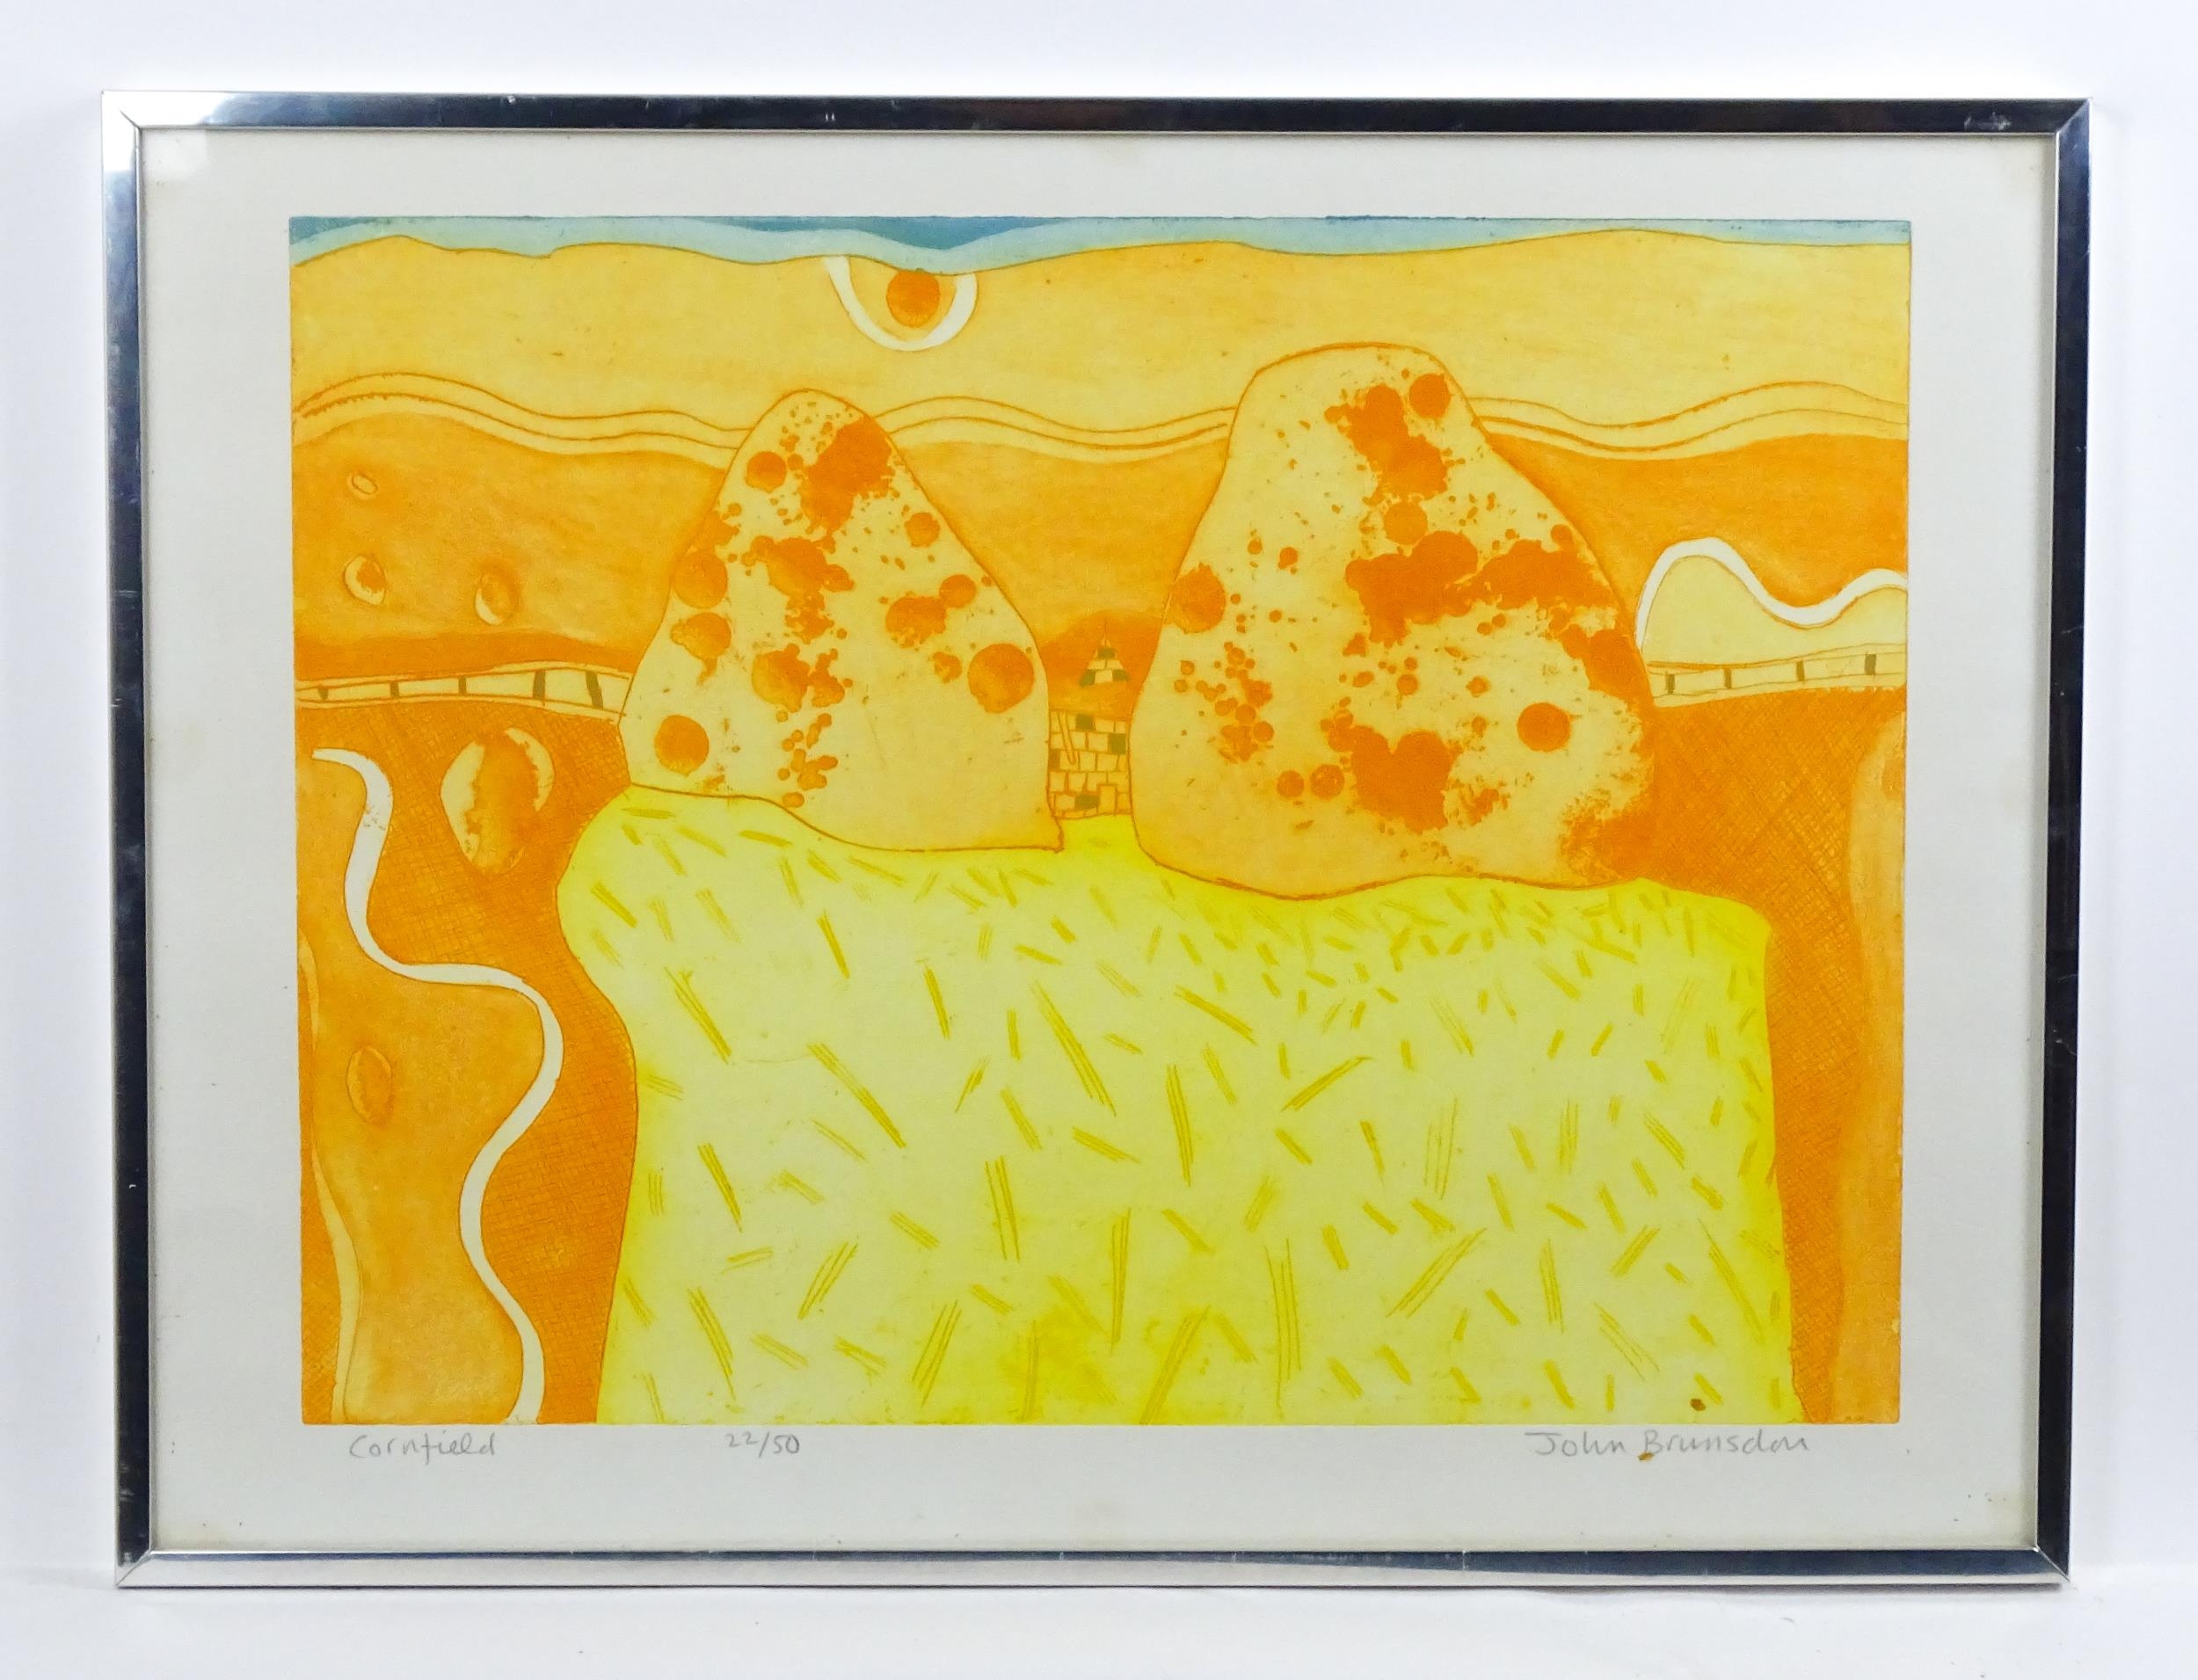 John Brunsdon (1933-2014), Limited edition etching with aquatint, Cornfield. Signed, titled and